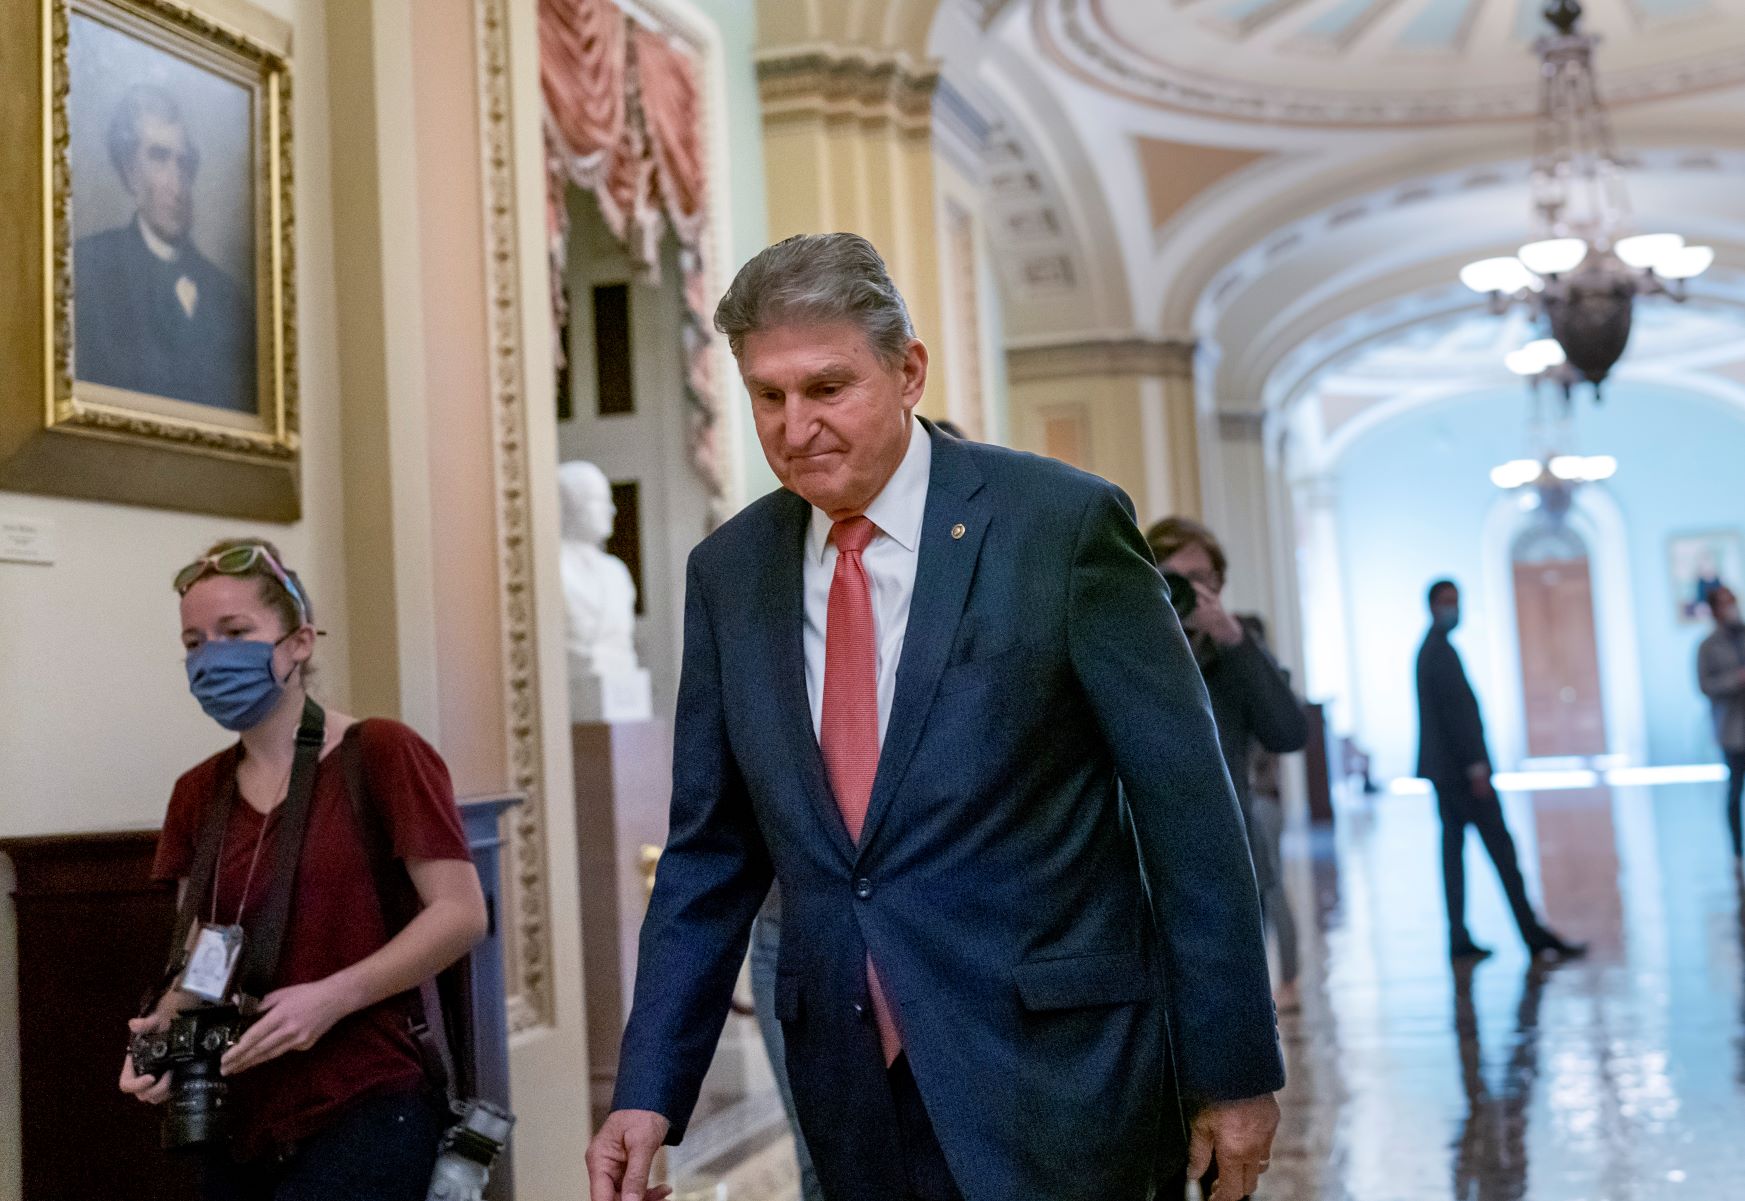 Sen. Joe Manchin Says No to $2T Bill: ‘I Can’t Vote for It’